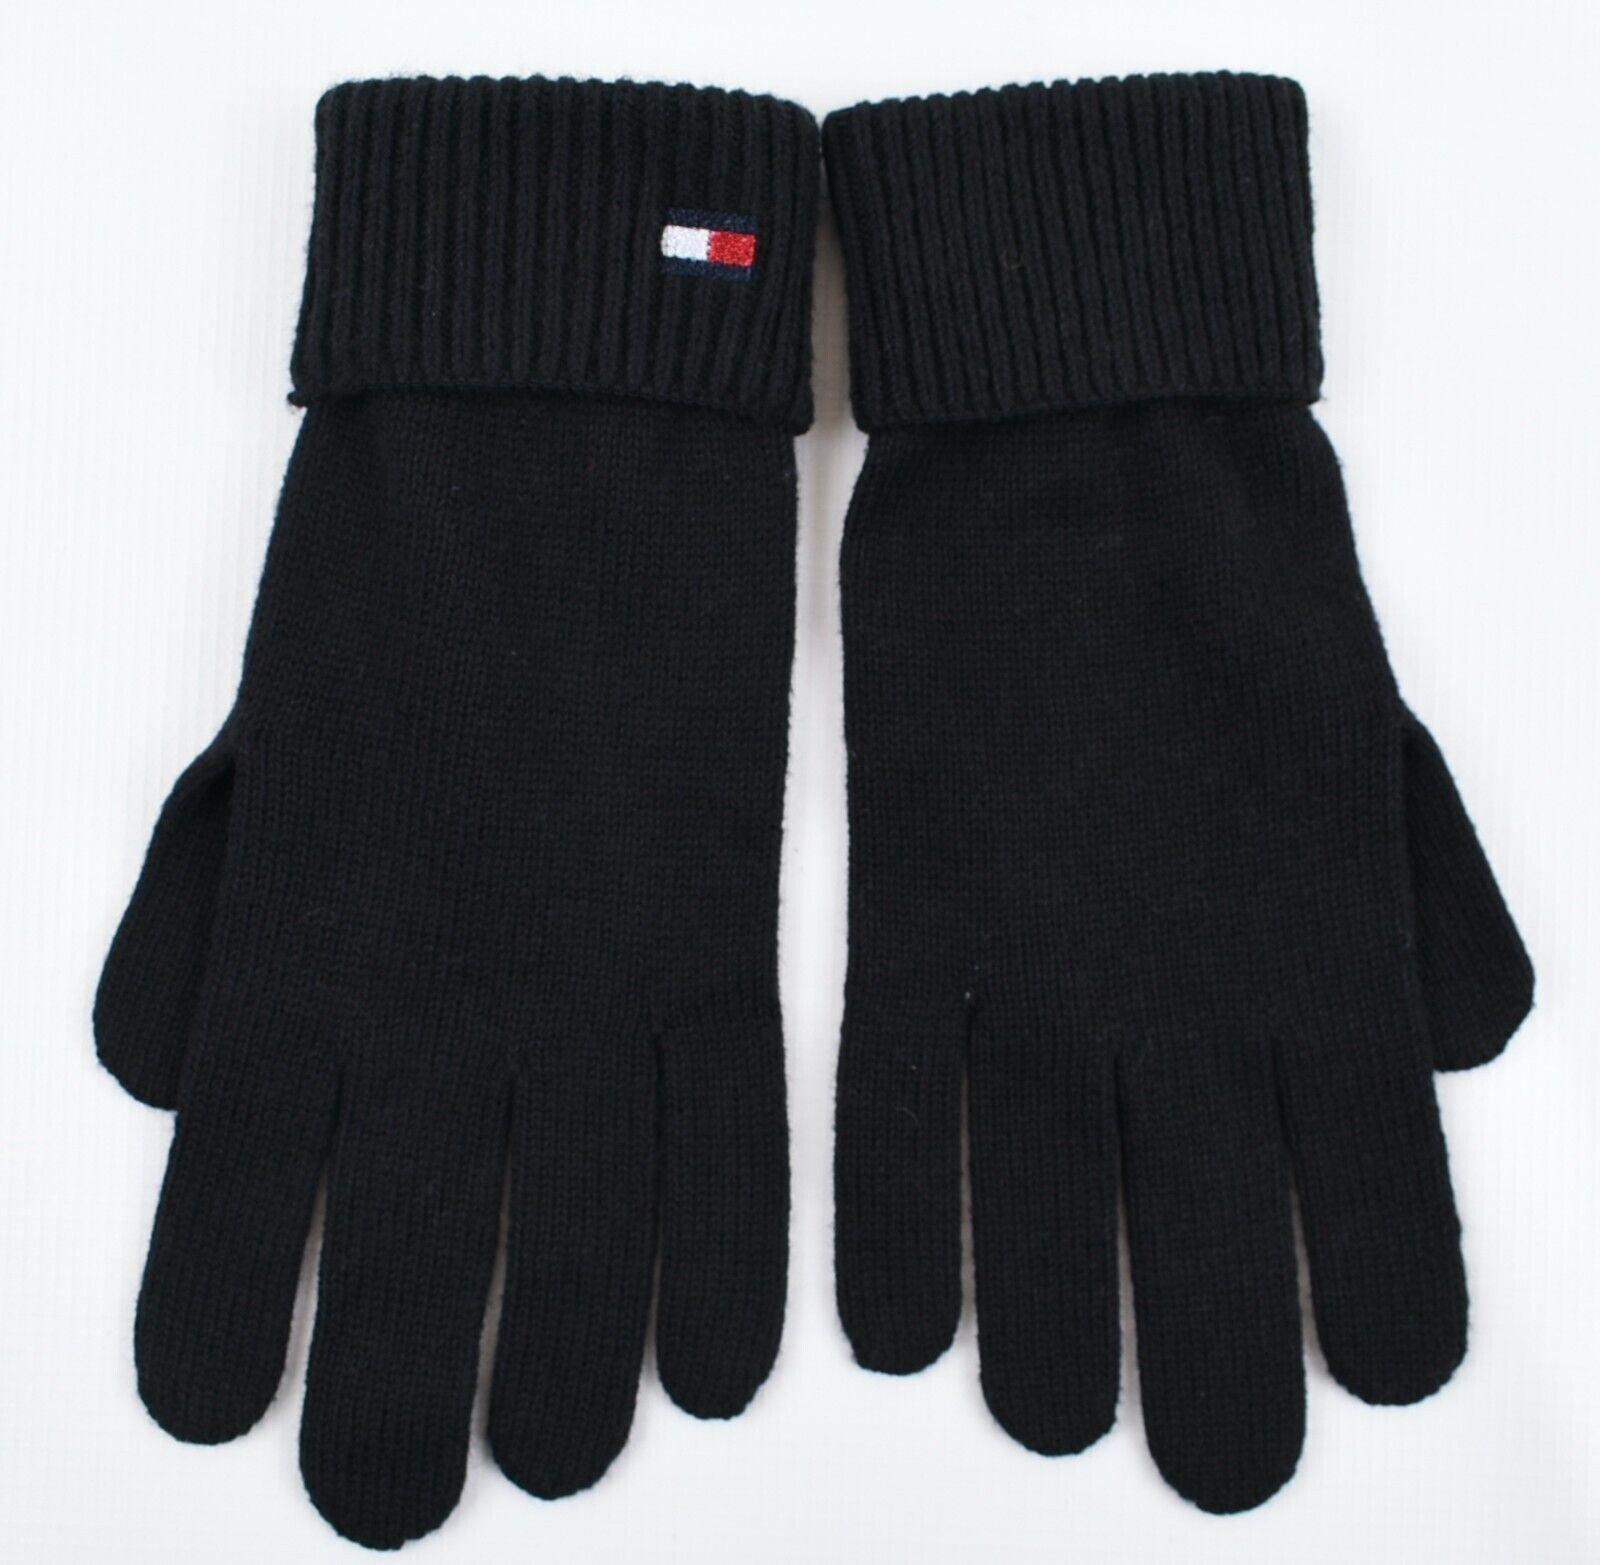 TOMMY HILFIGER Women's COTTON/CASHMERE Knitted Gloves, Black, One Size